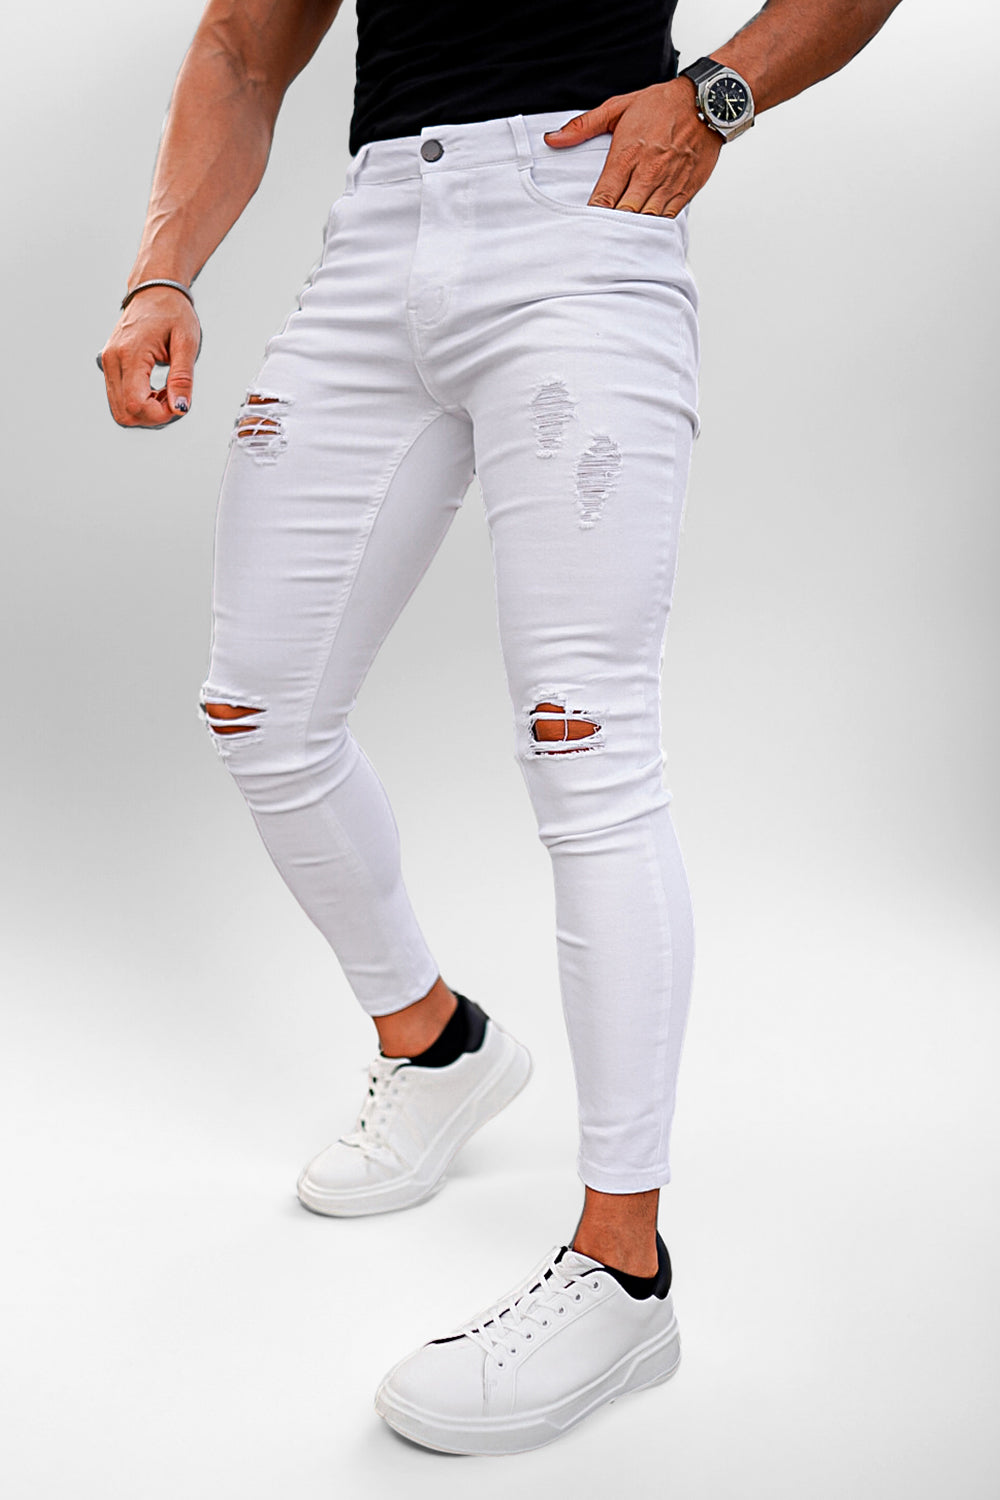 Men's White Skinny Jean - Ripped For Sale – GINGTTO